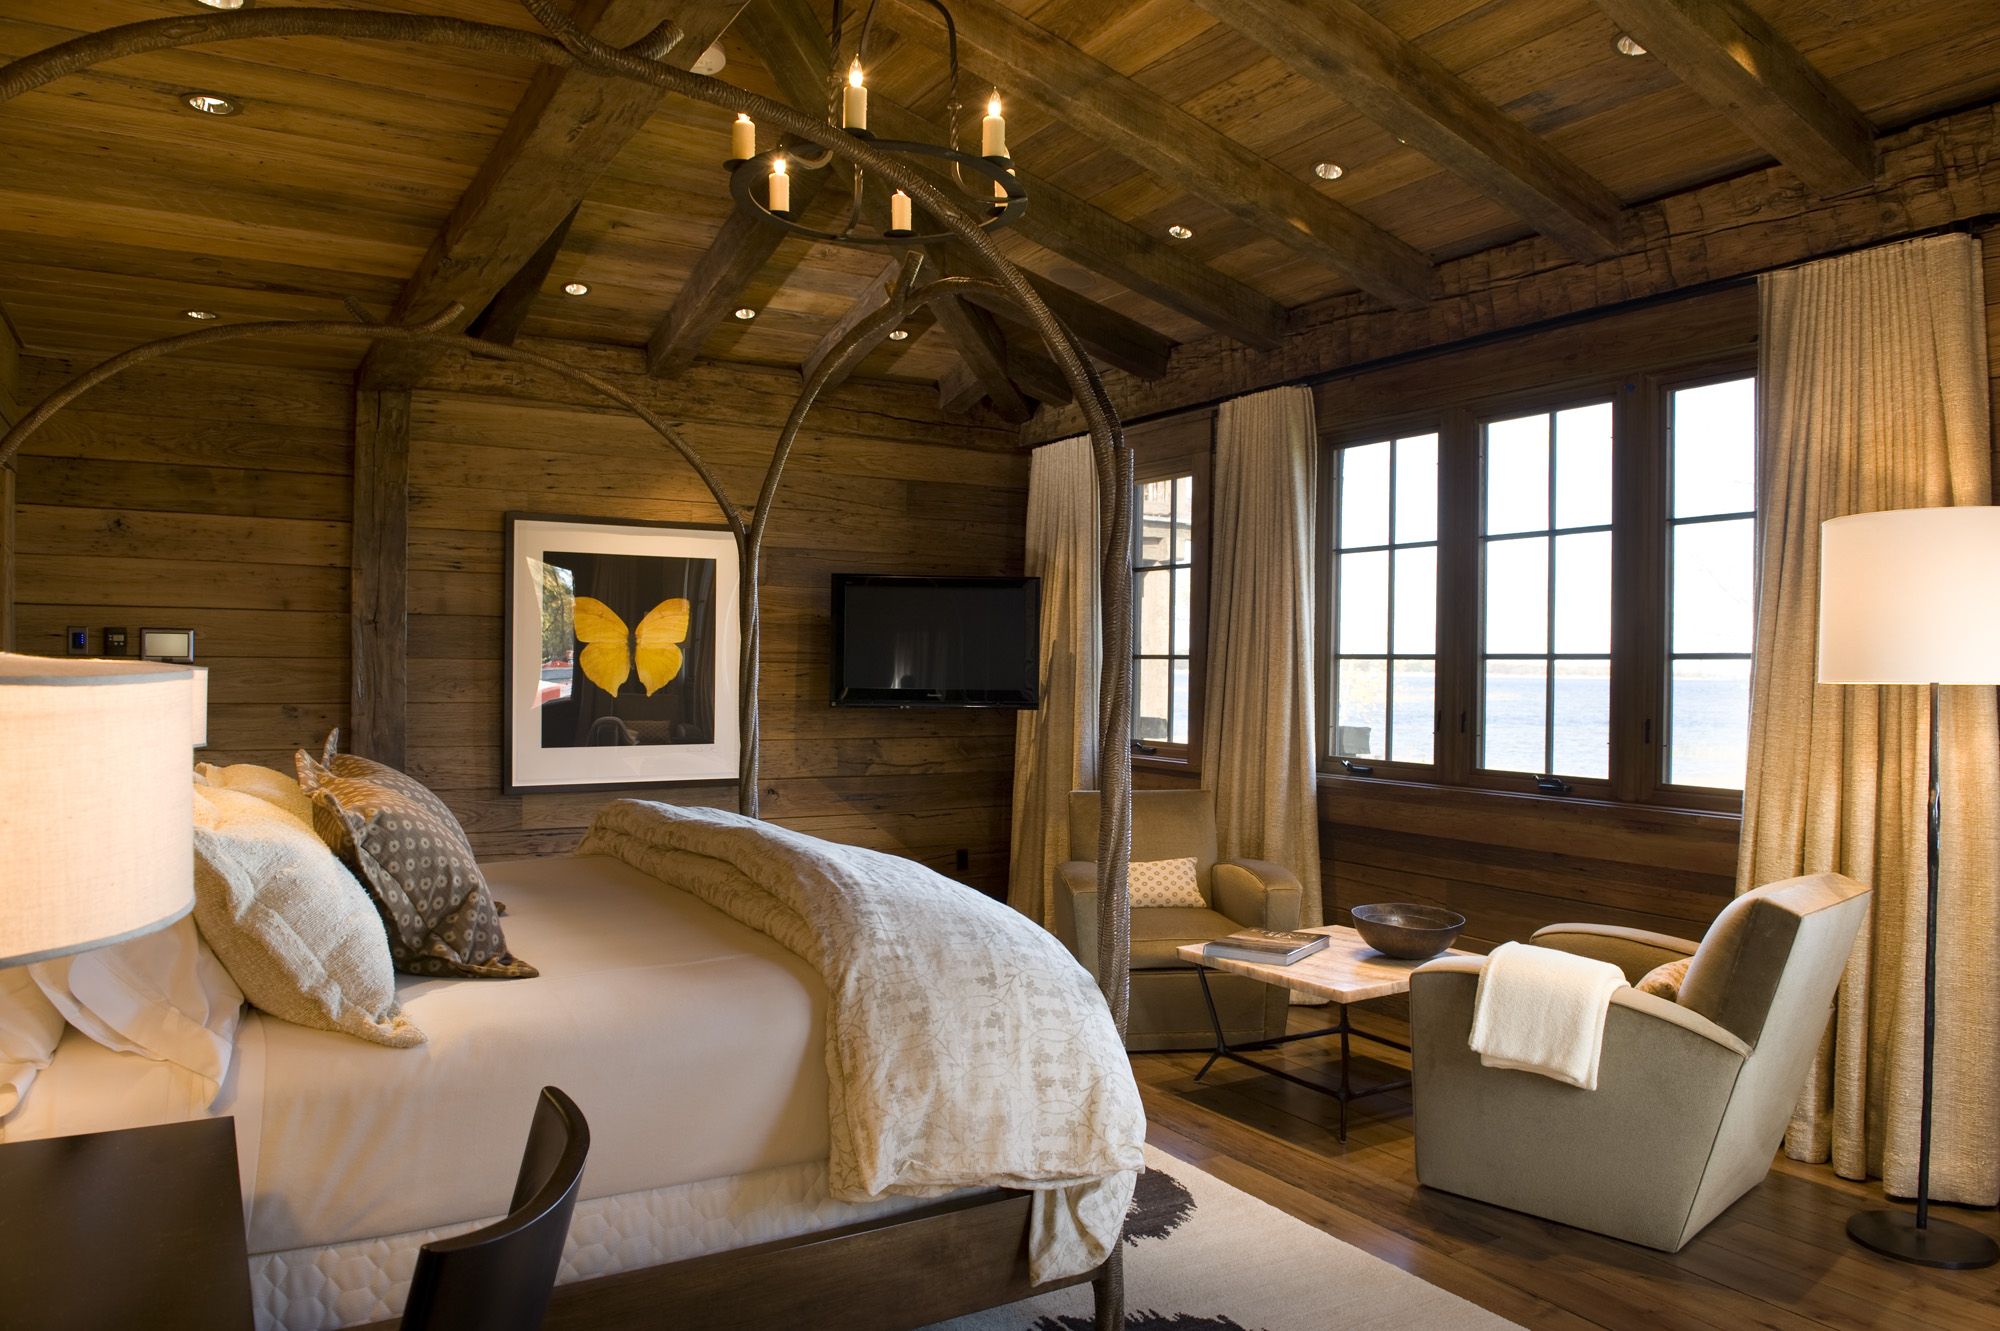 Rustic Retreat: Cozy And Chic Wood Ceiling Concepts For Bedrooms